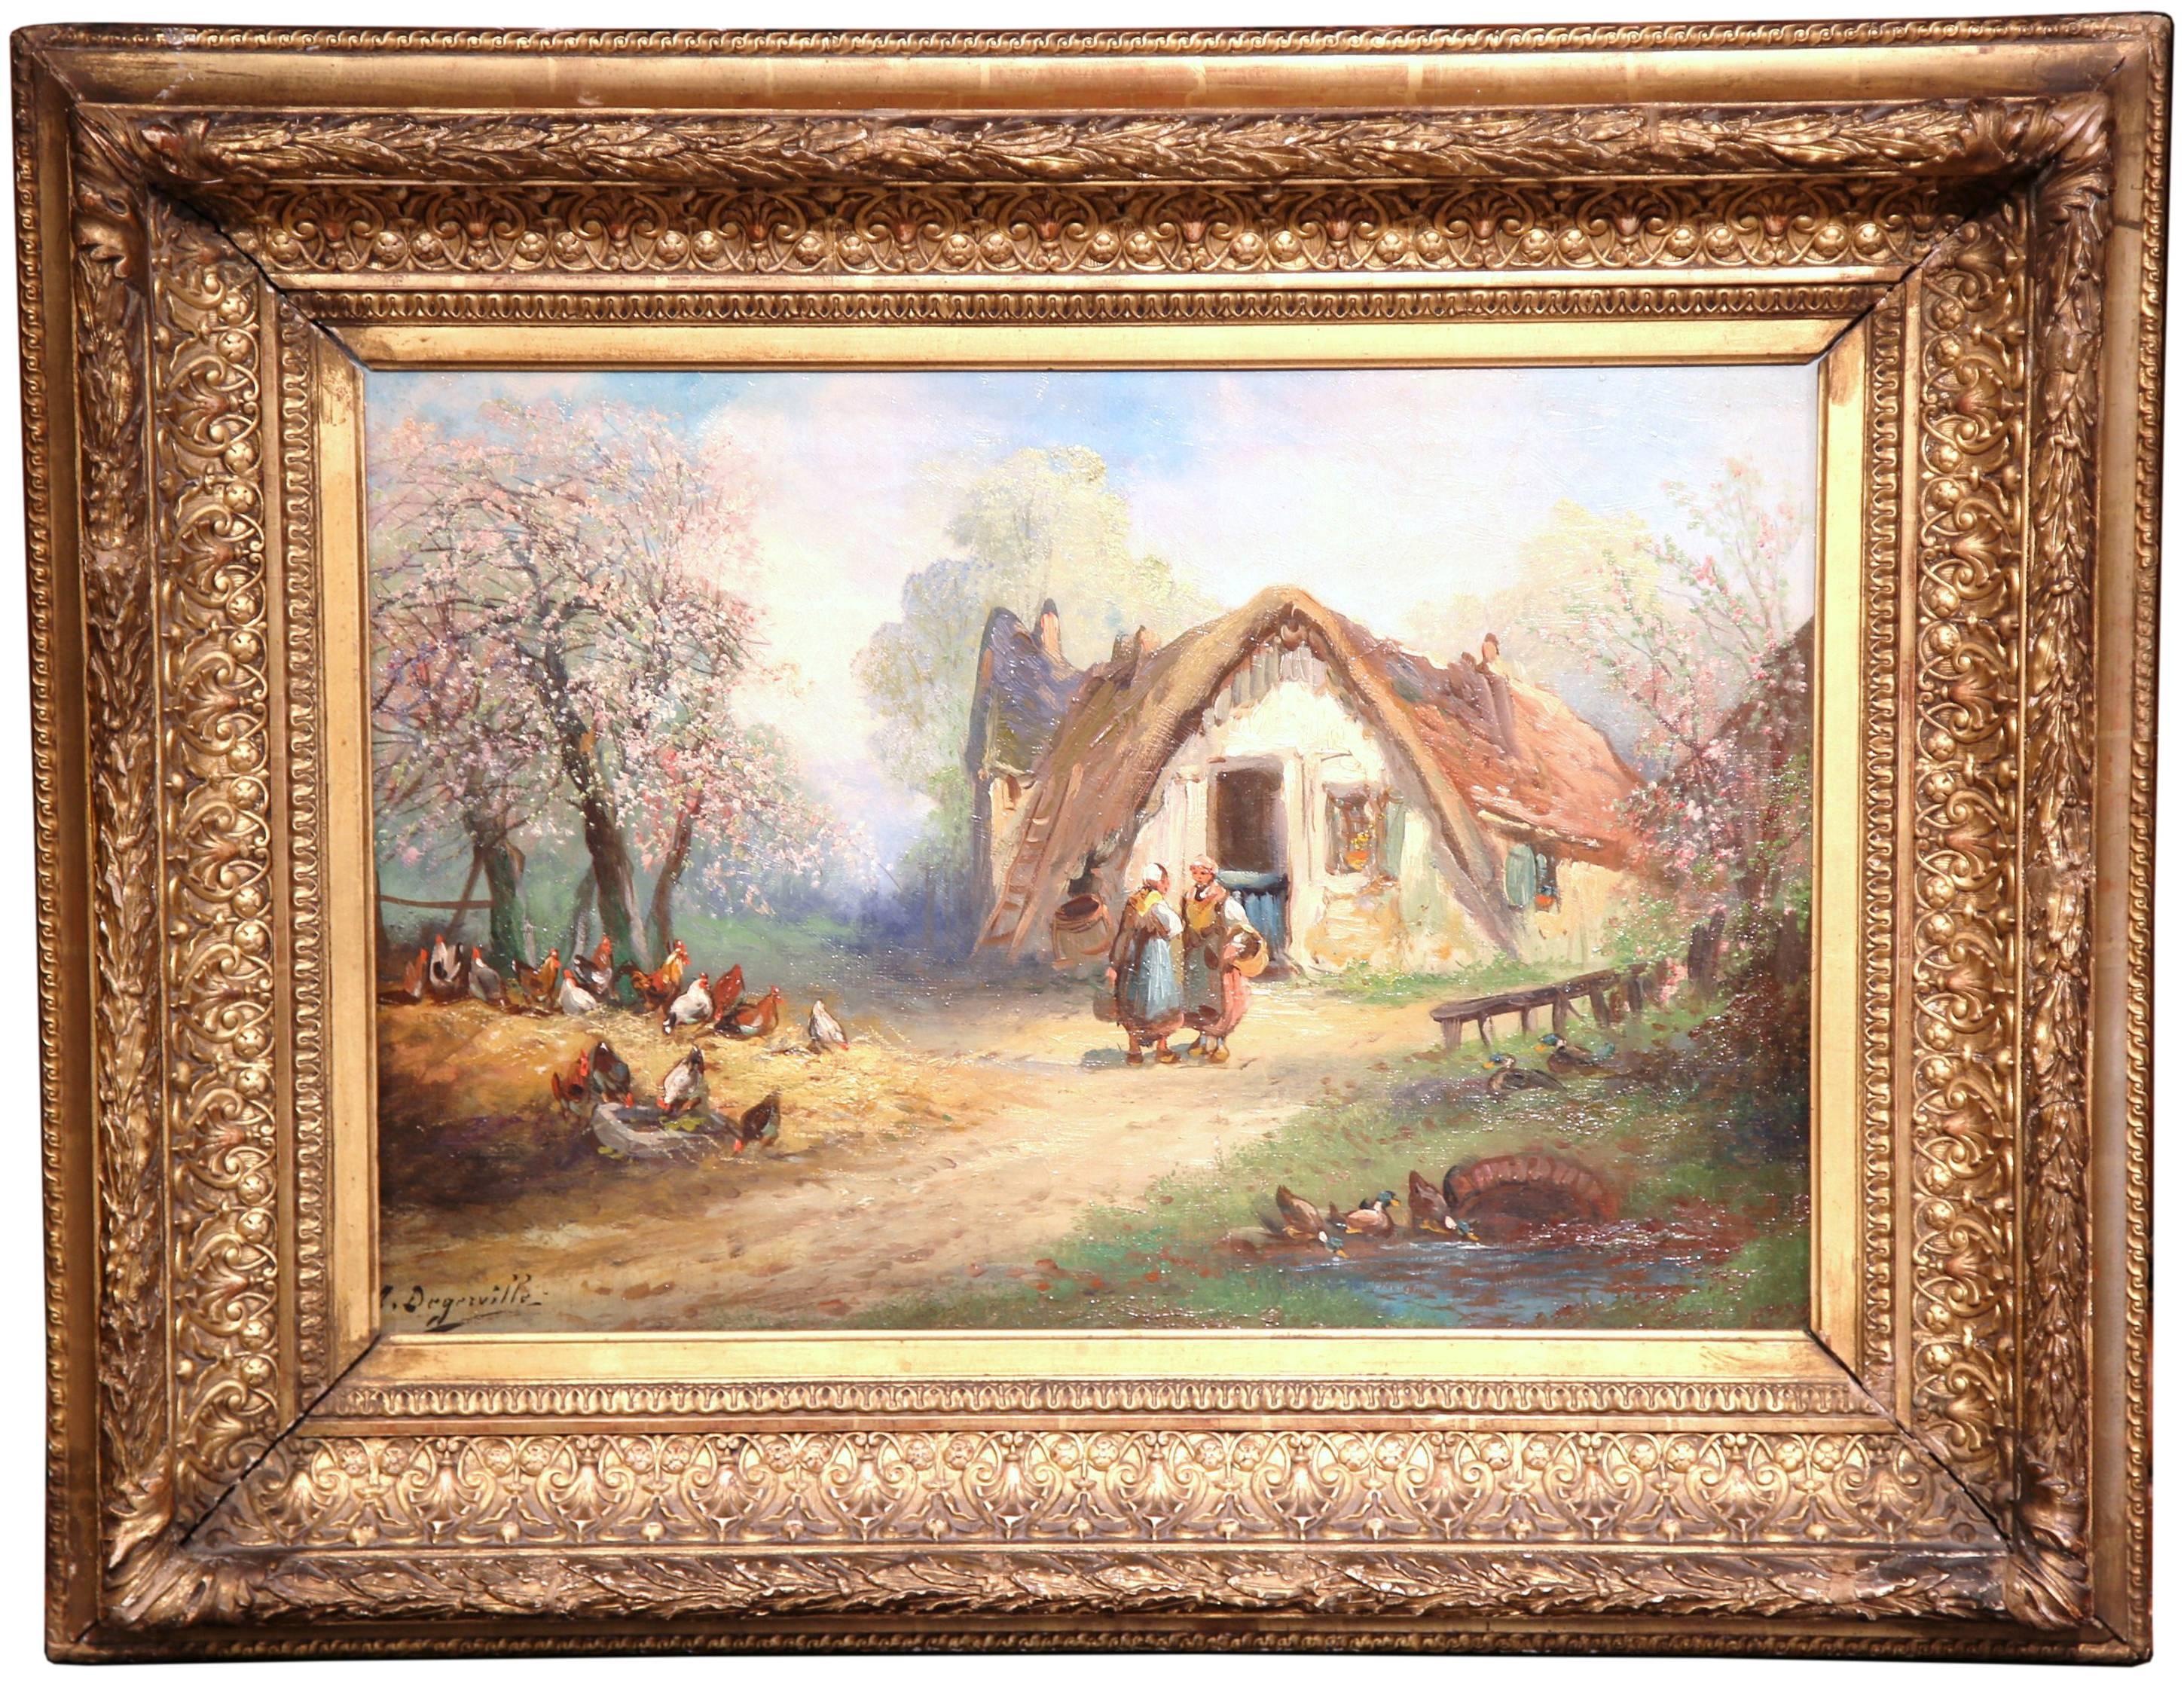 Unknown Landscape Painting - 19th Century French Oil on Canvas Country Scene Painting Signed Degerville